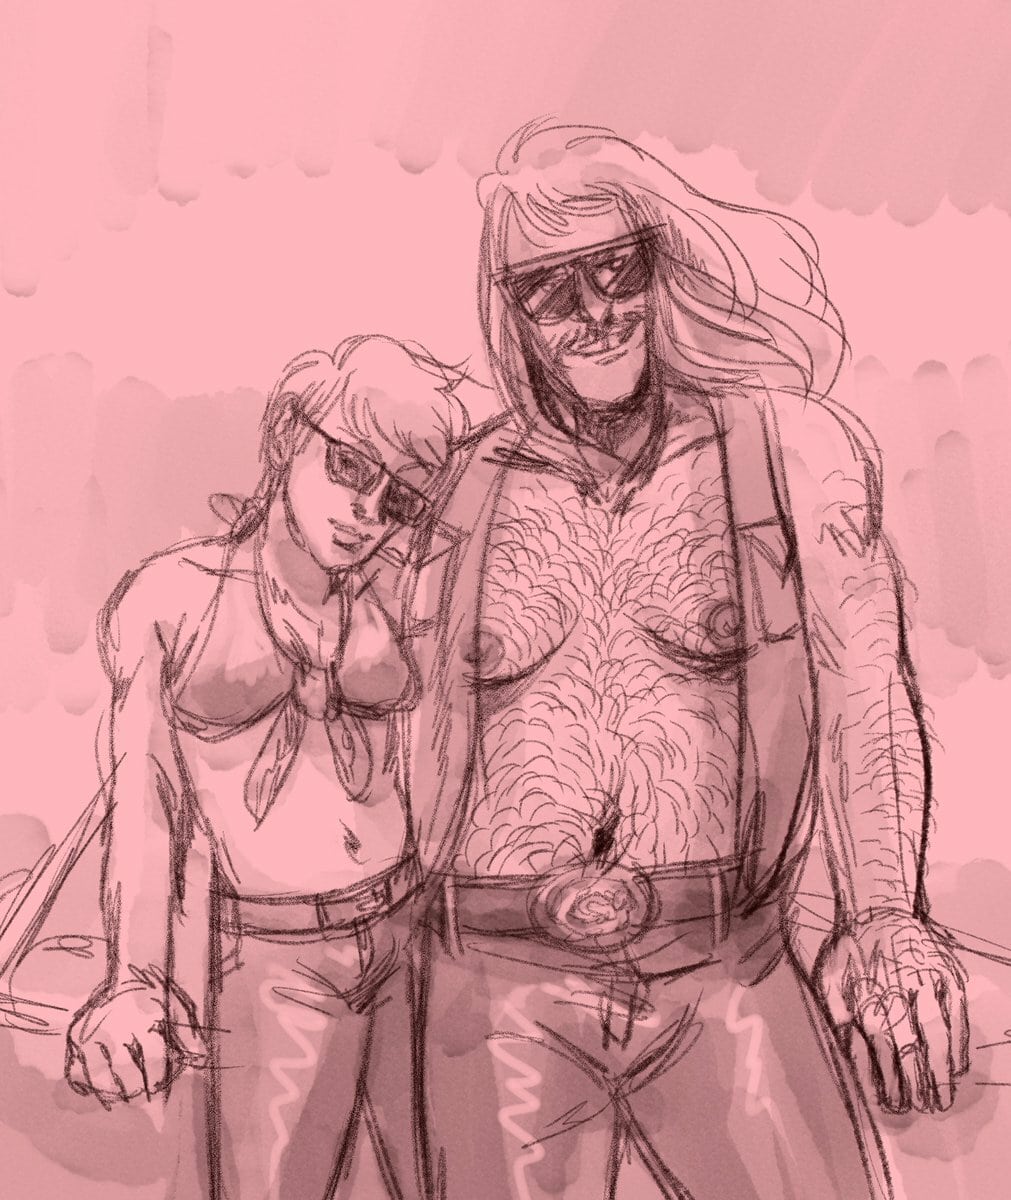 teresa and astral standing in front of a car, similar to the vibe of the movie natural born killers. she's smirking at the camera and astral has his arm wrapped around her shoulders. she's wearing a tie-over shirt and he's wearing big sunglasses and an open jacket, titties exposed.